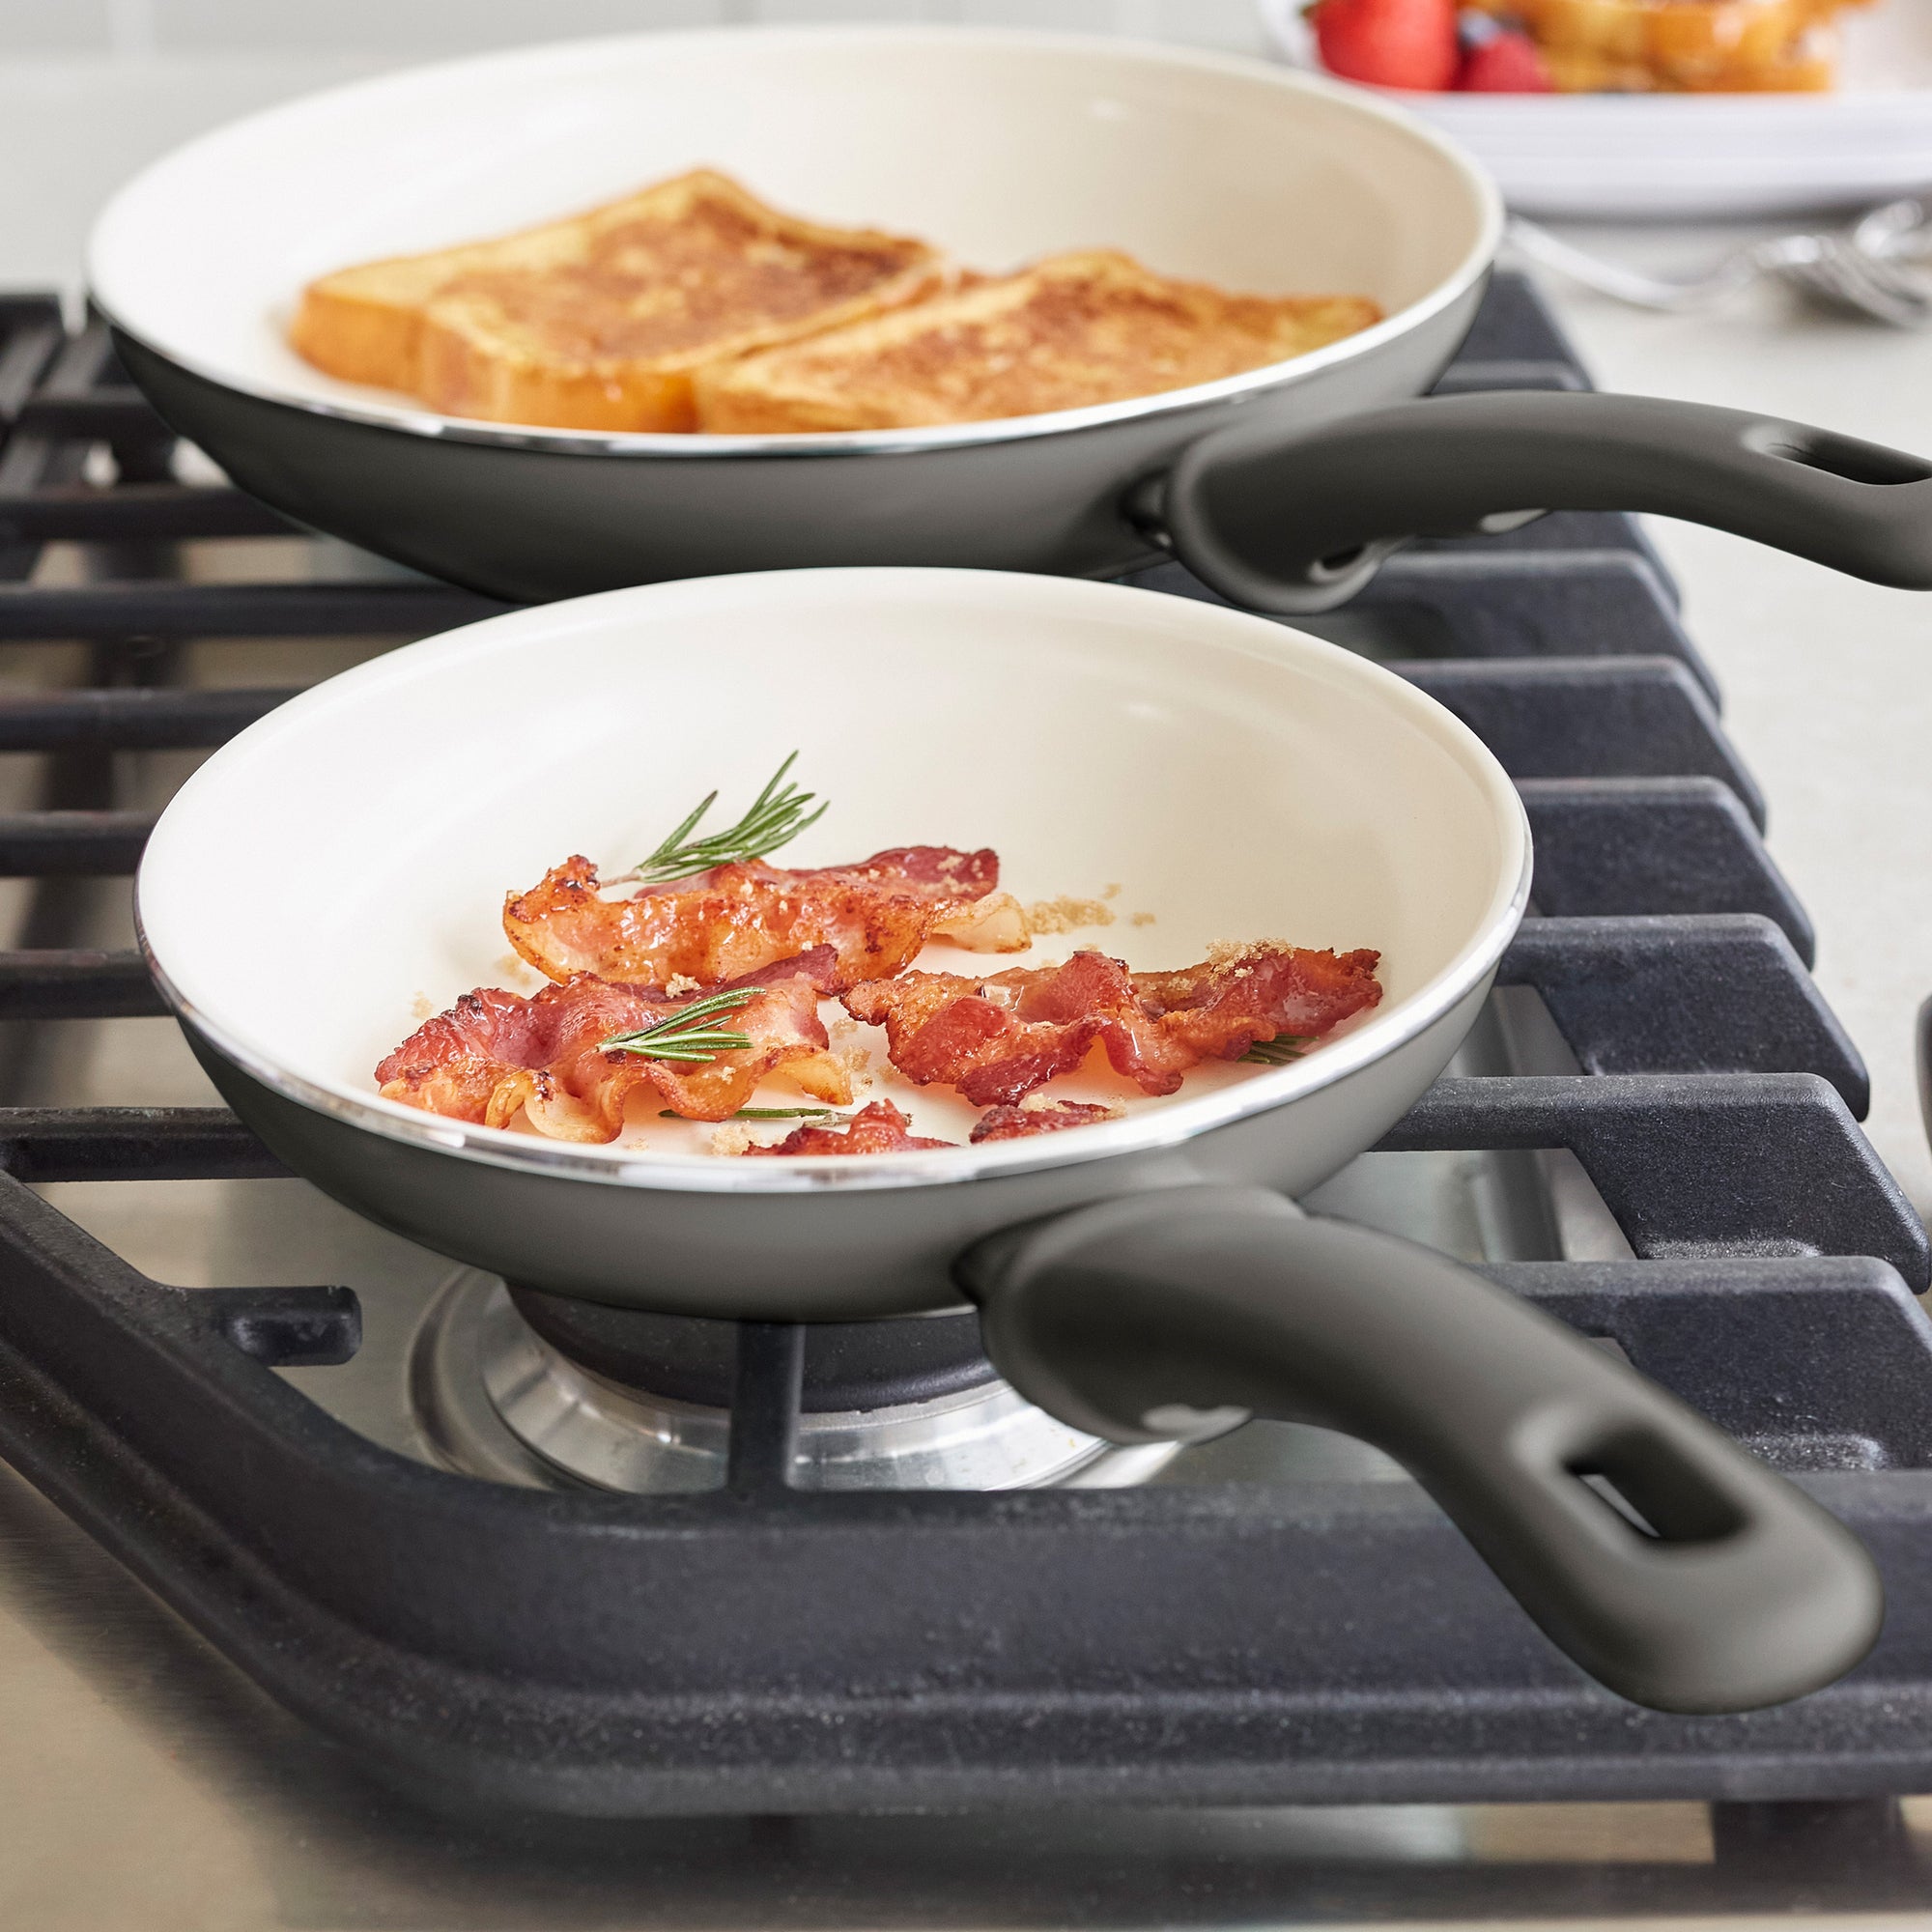 GreenLife  Soft Grip Pro 10-Inch Frypan